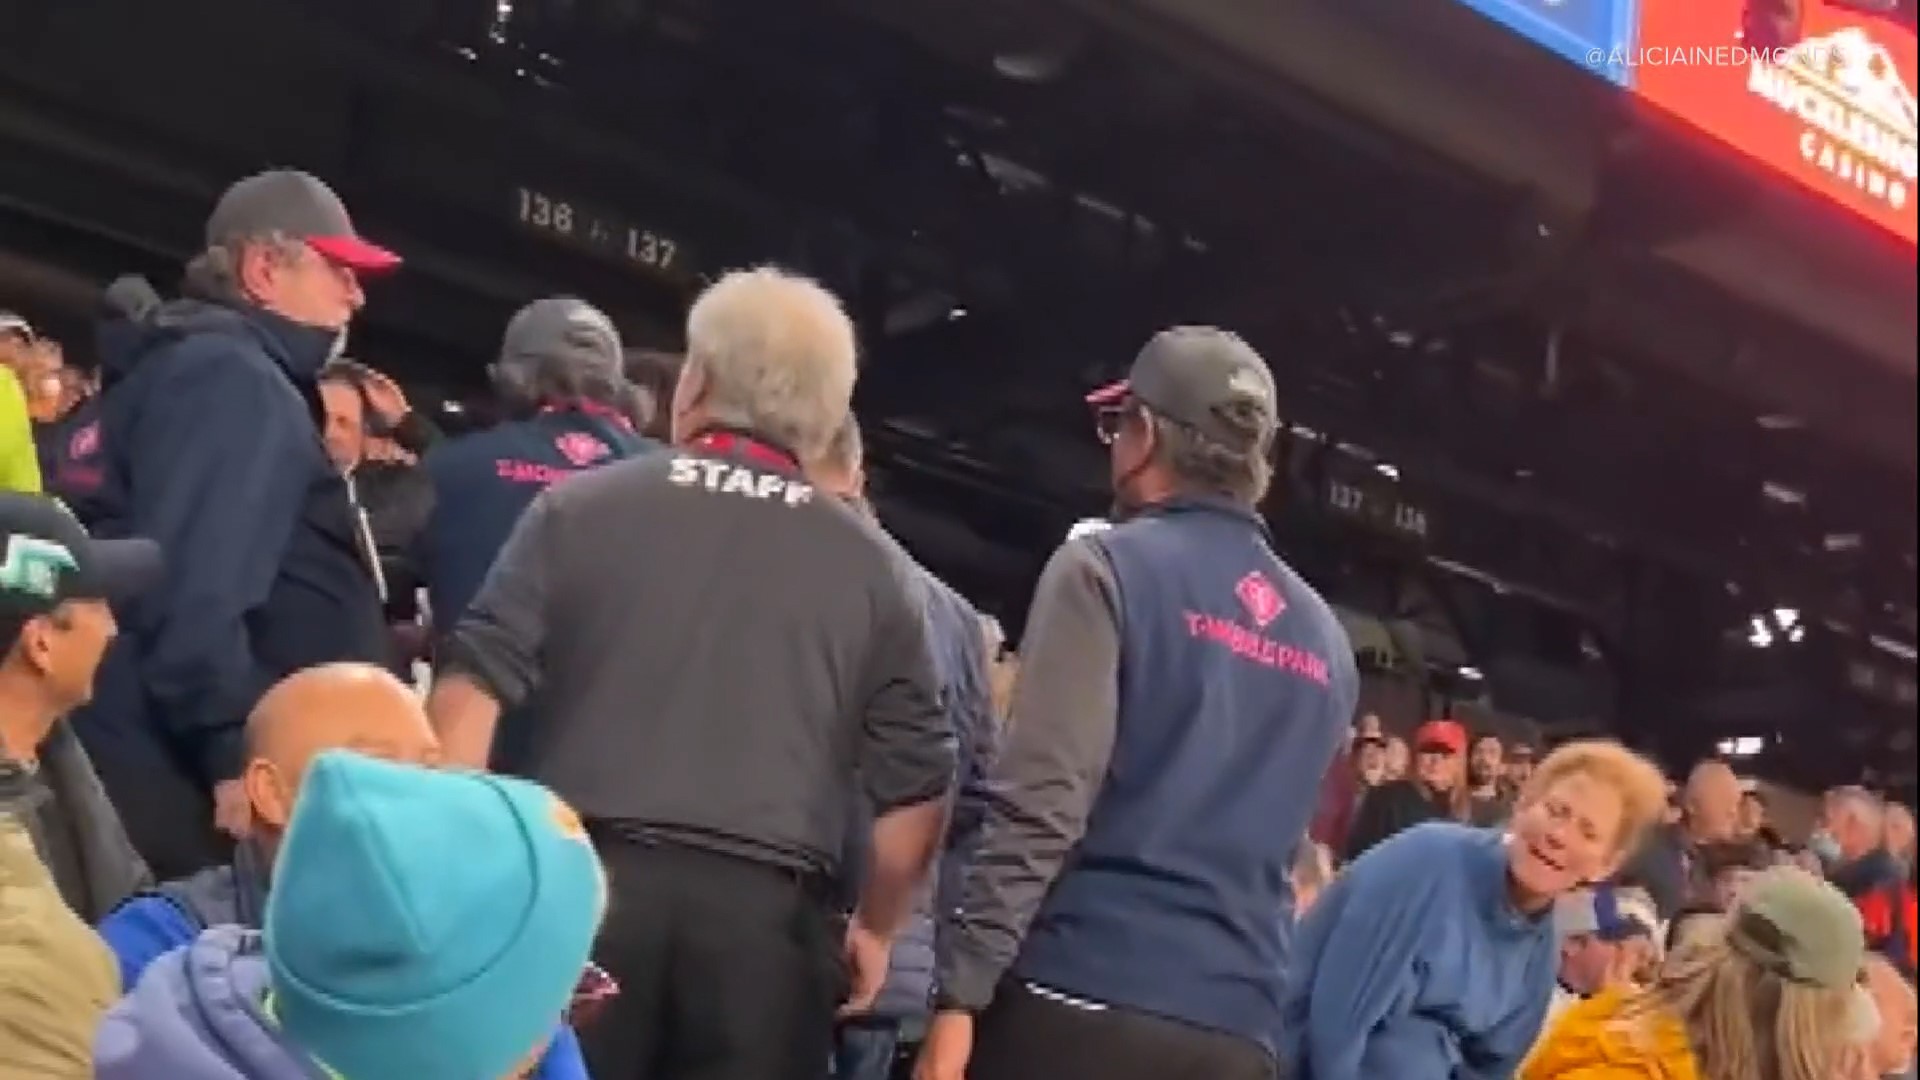 The fan appeared to have been escorted out of the game after hitting Kirby with the ball.